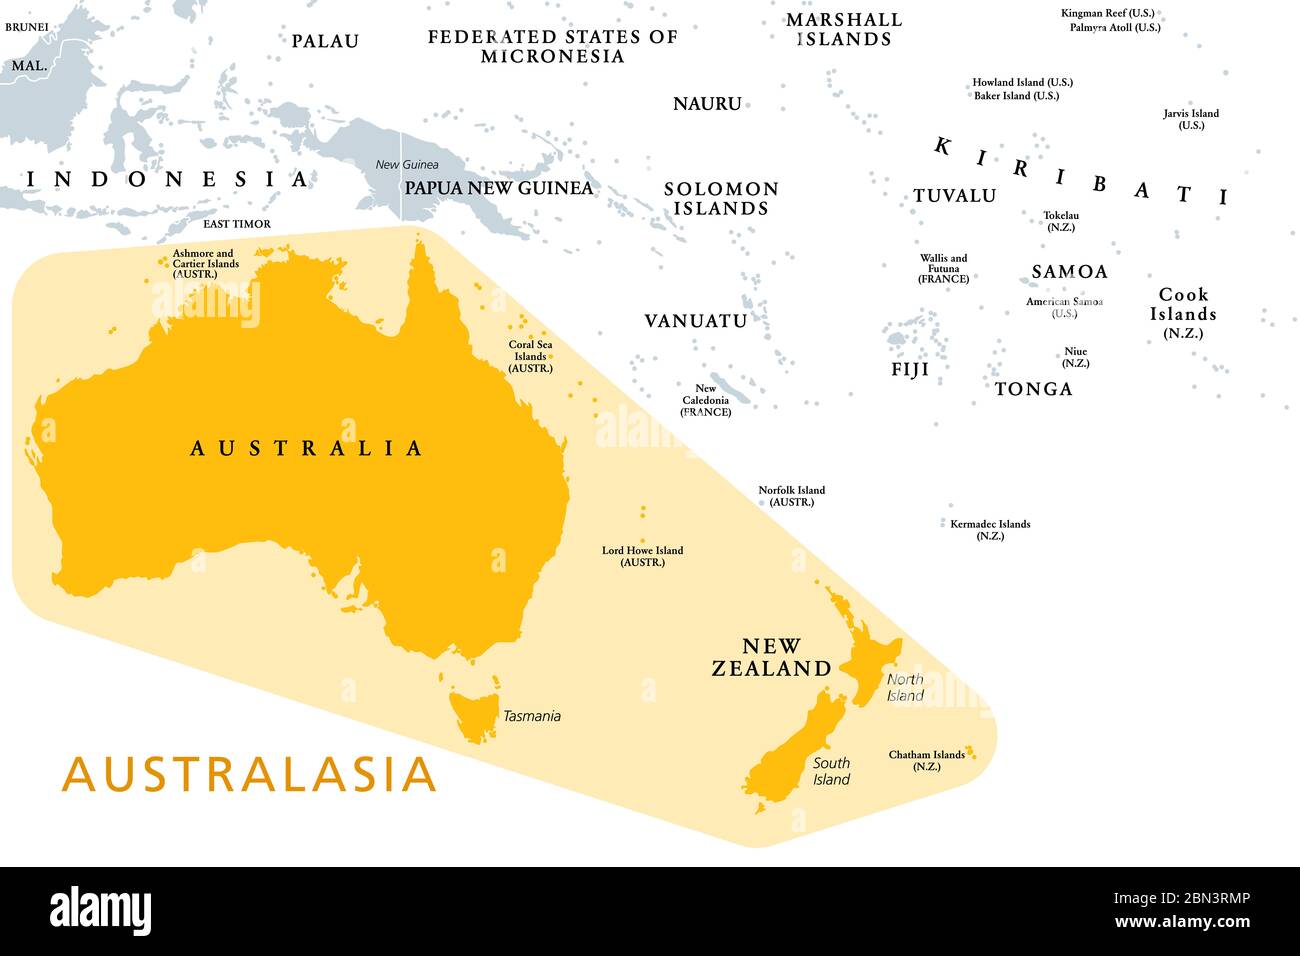 Australasia, Australia and New Zealand, a subregion of Oceania, political map. In UN geoscheme the continent Australia with New Zealand. Stock Photo